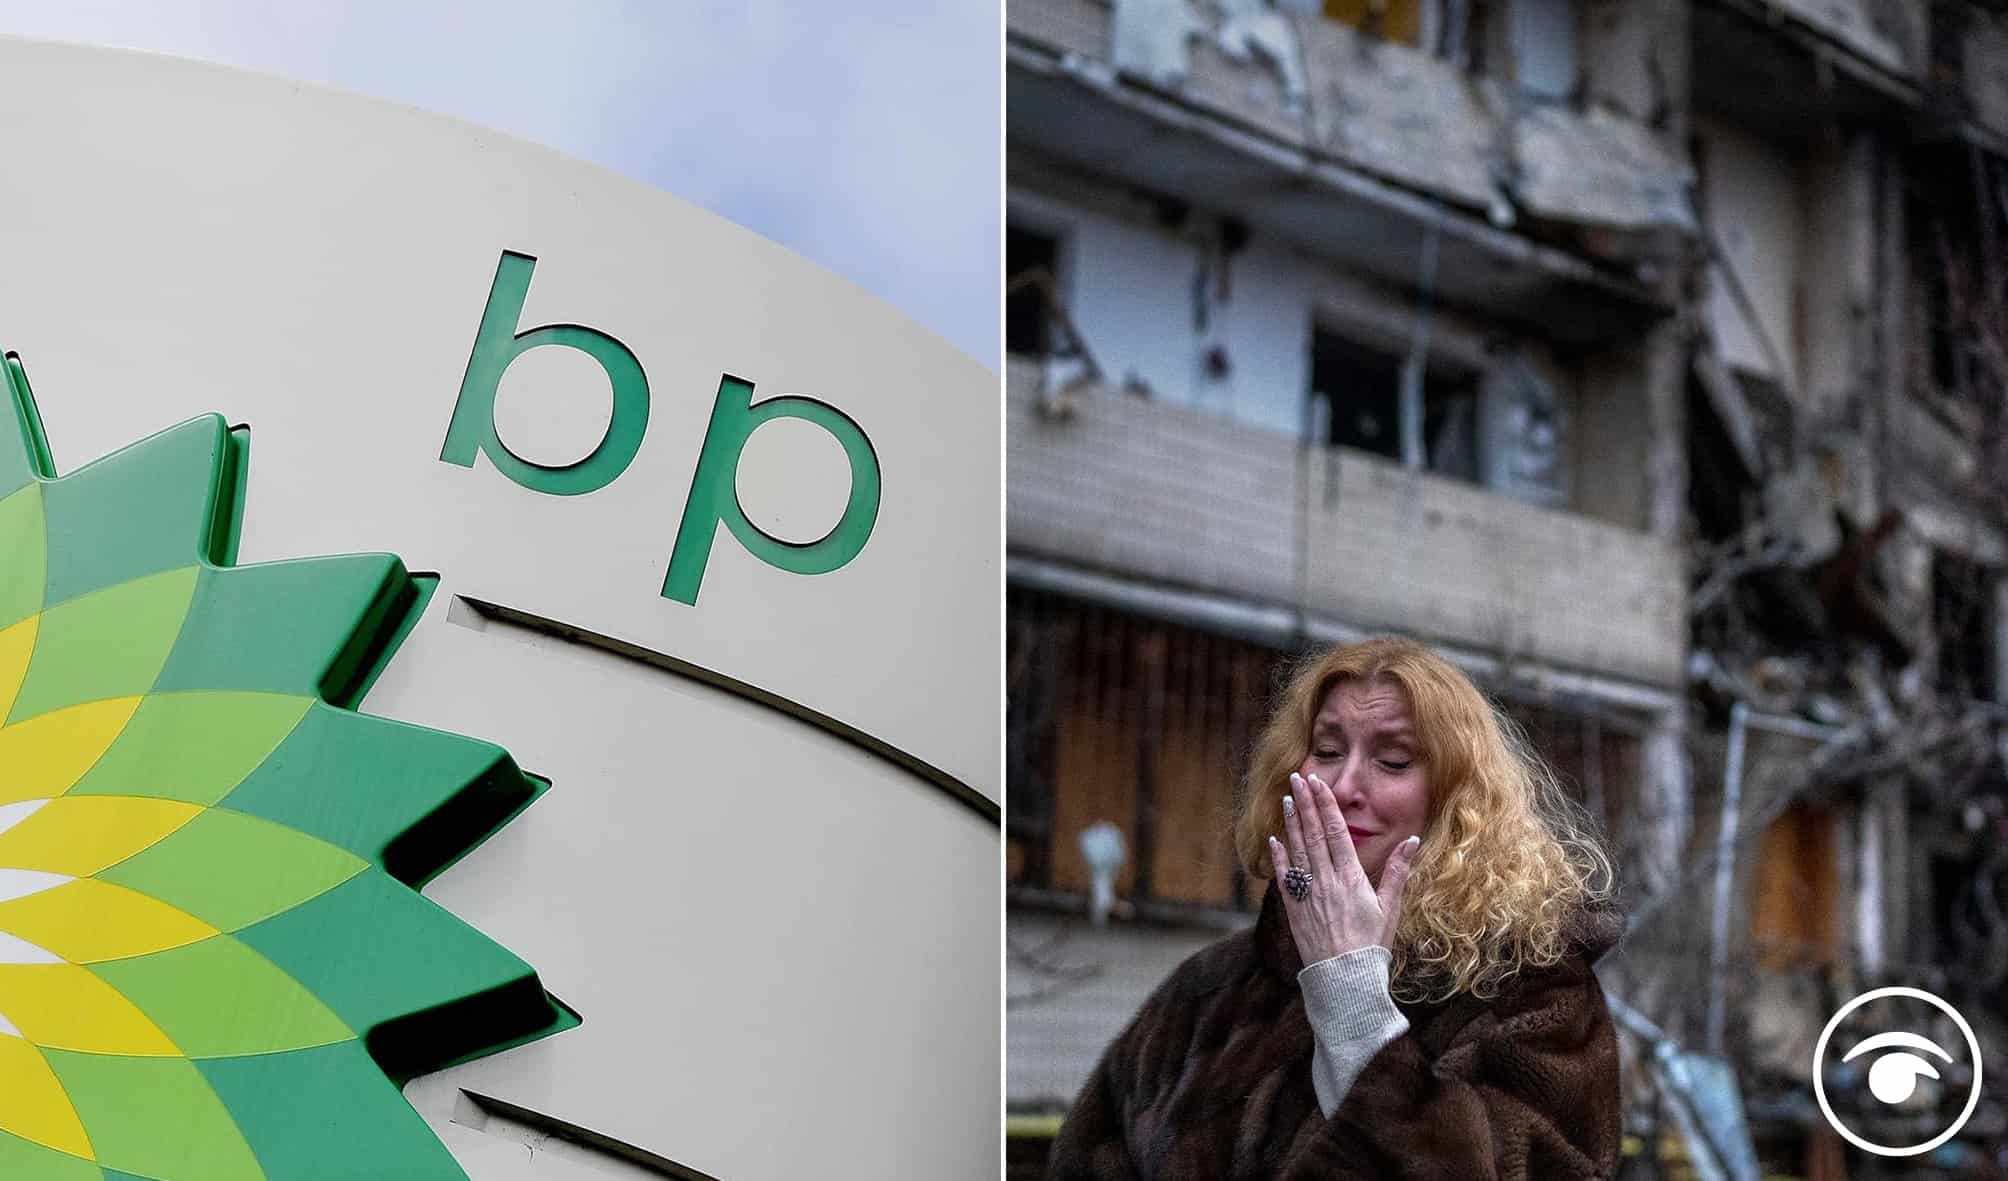 BP – who owns 20% of Russian oil company – warned of impact on business if Russia hit with sanctions